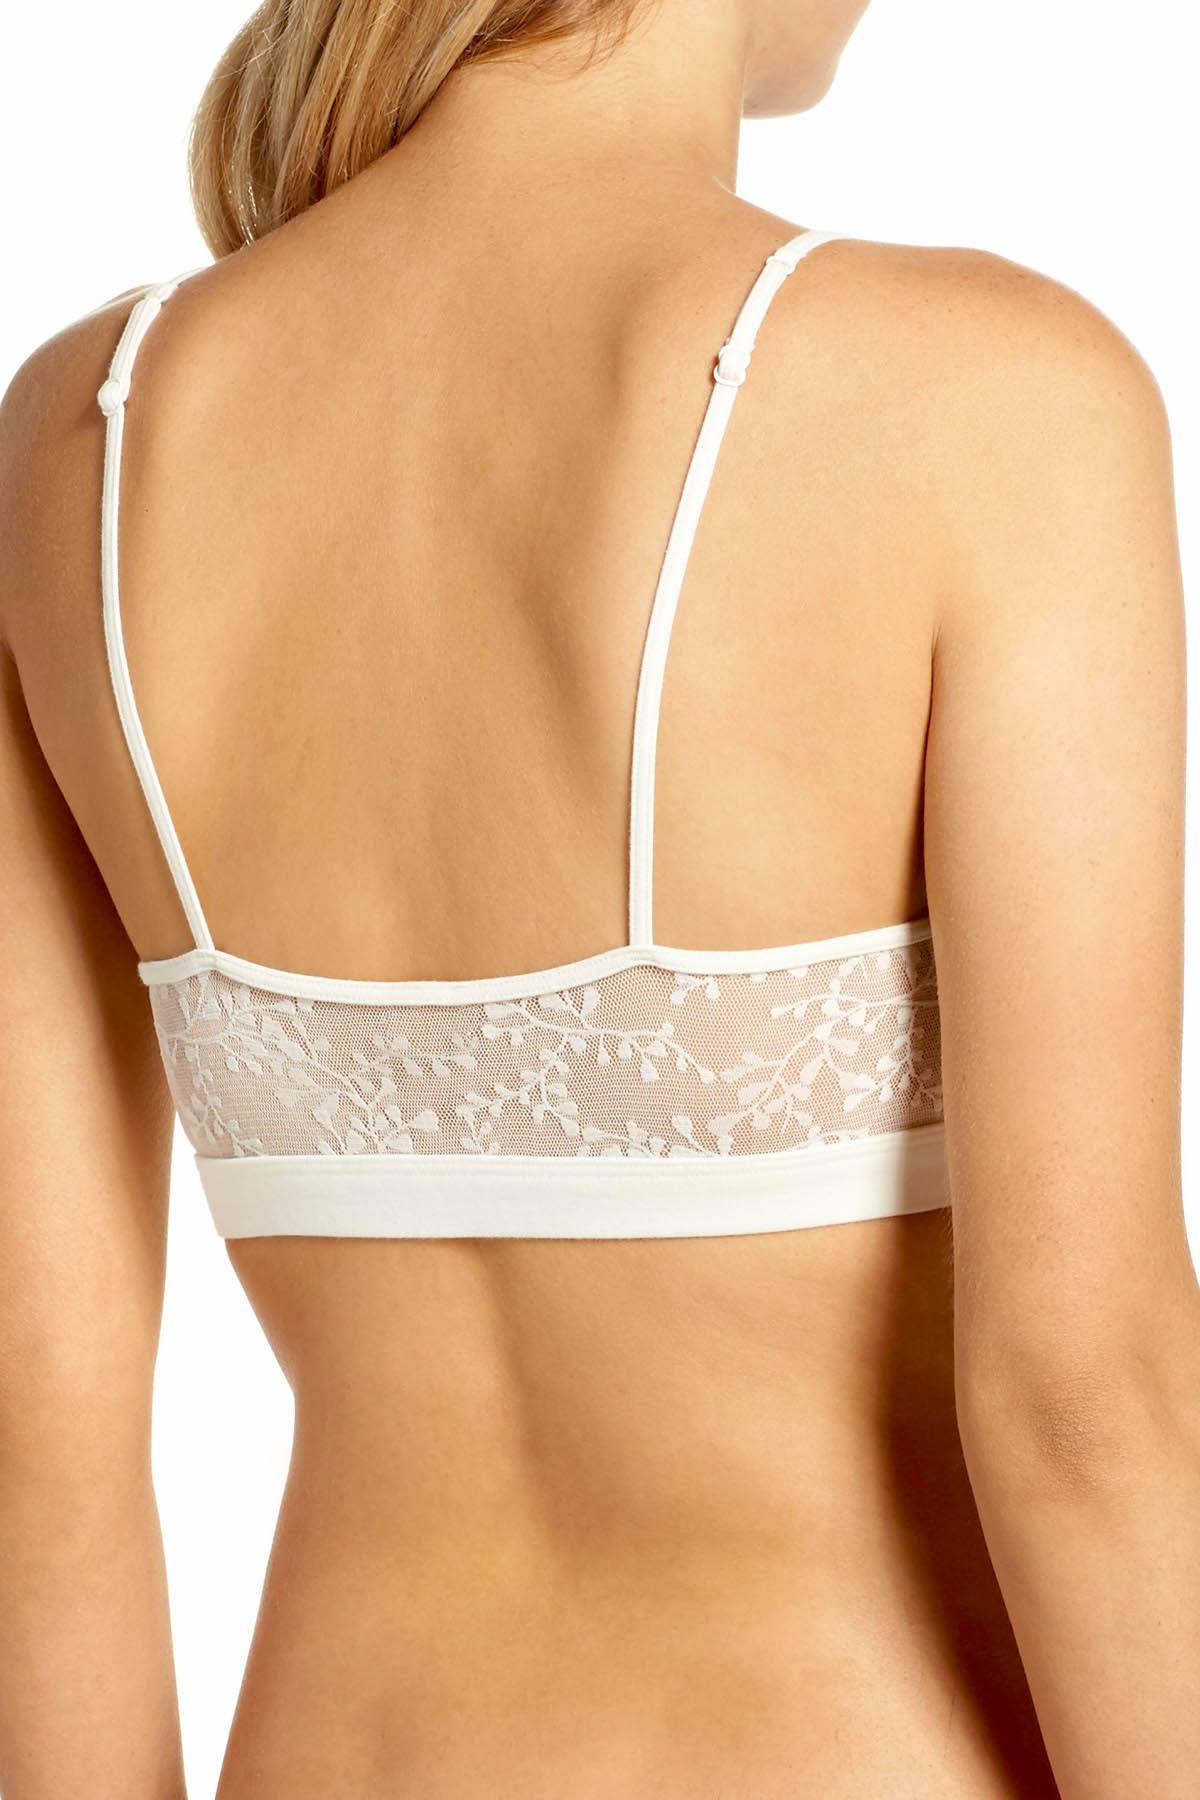 Calvin Klein Ivory Exclusive Bare Lace Bralette